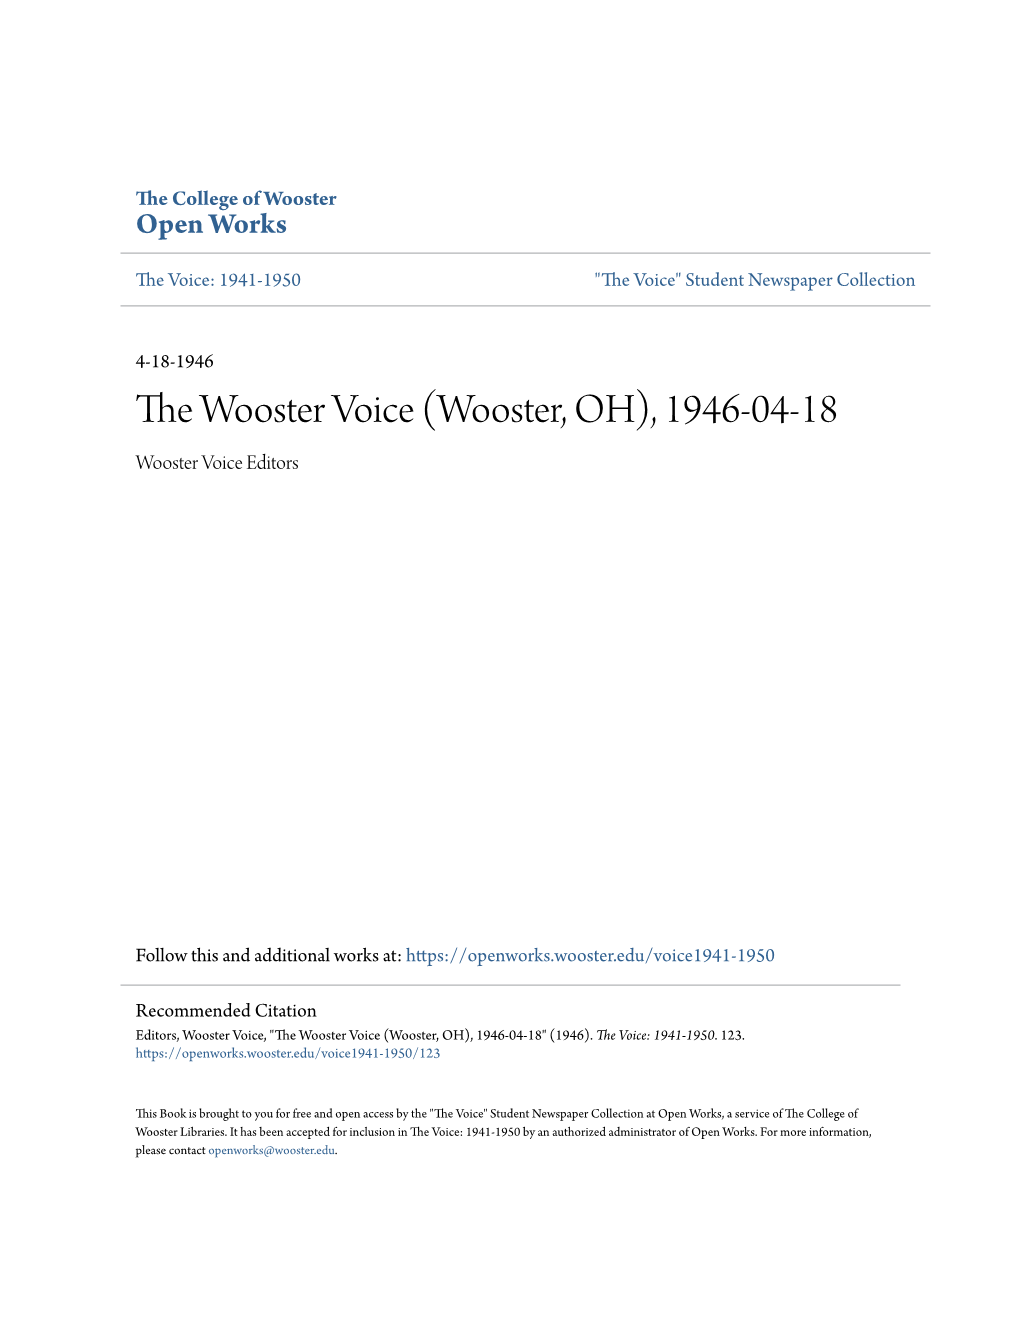 Wooster, OH), 1946-04-18 Wooster Voice Editors